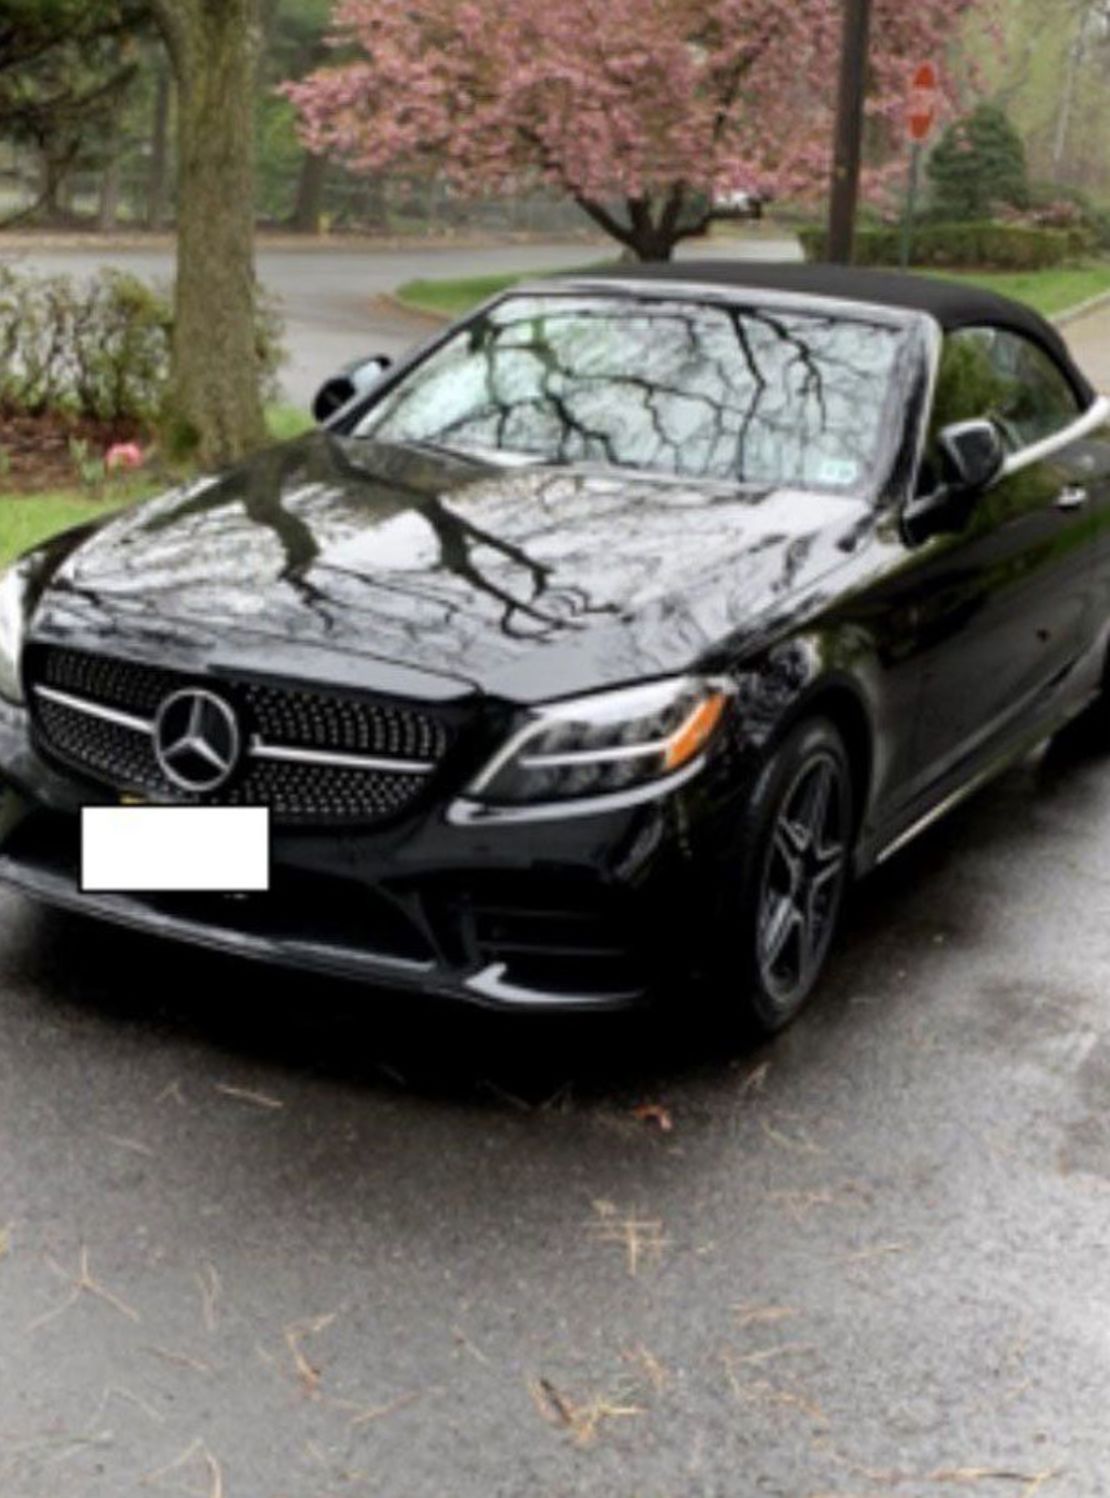 Nadine Menendez purchased the Mercedes-Benz C-class convertible with a $15,000 down payment the day after prosecutors say she was given $15,000 in a parking lot by Uribe. They included this photo in court documents.